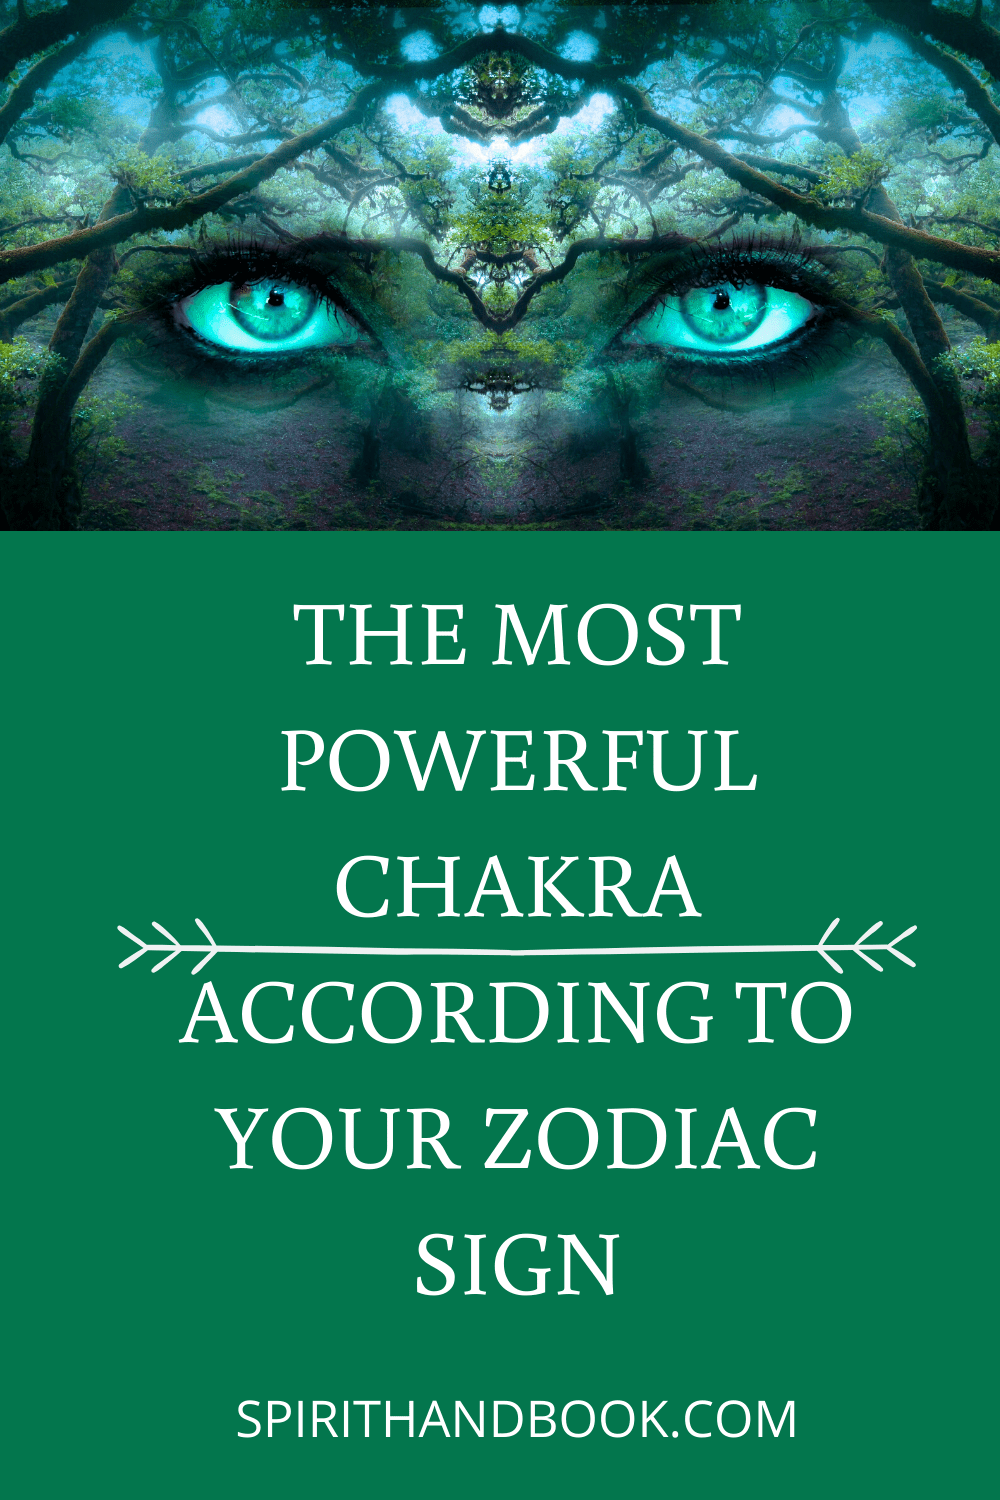 Zodiac sign is the most powerful